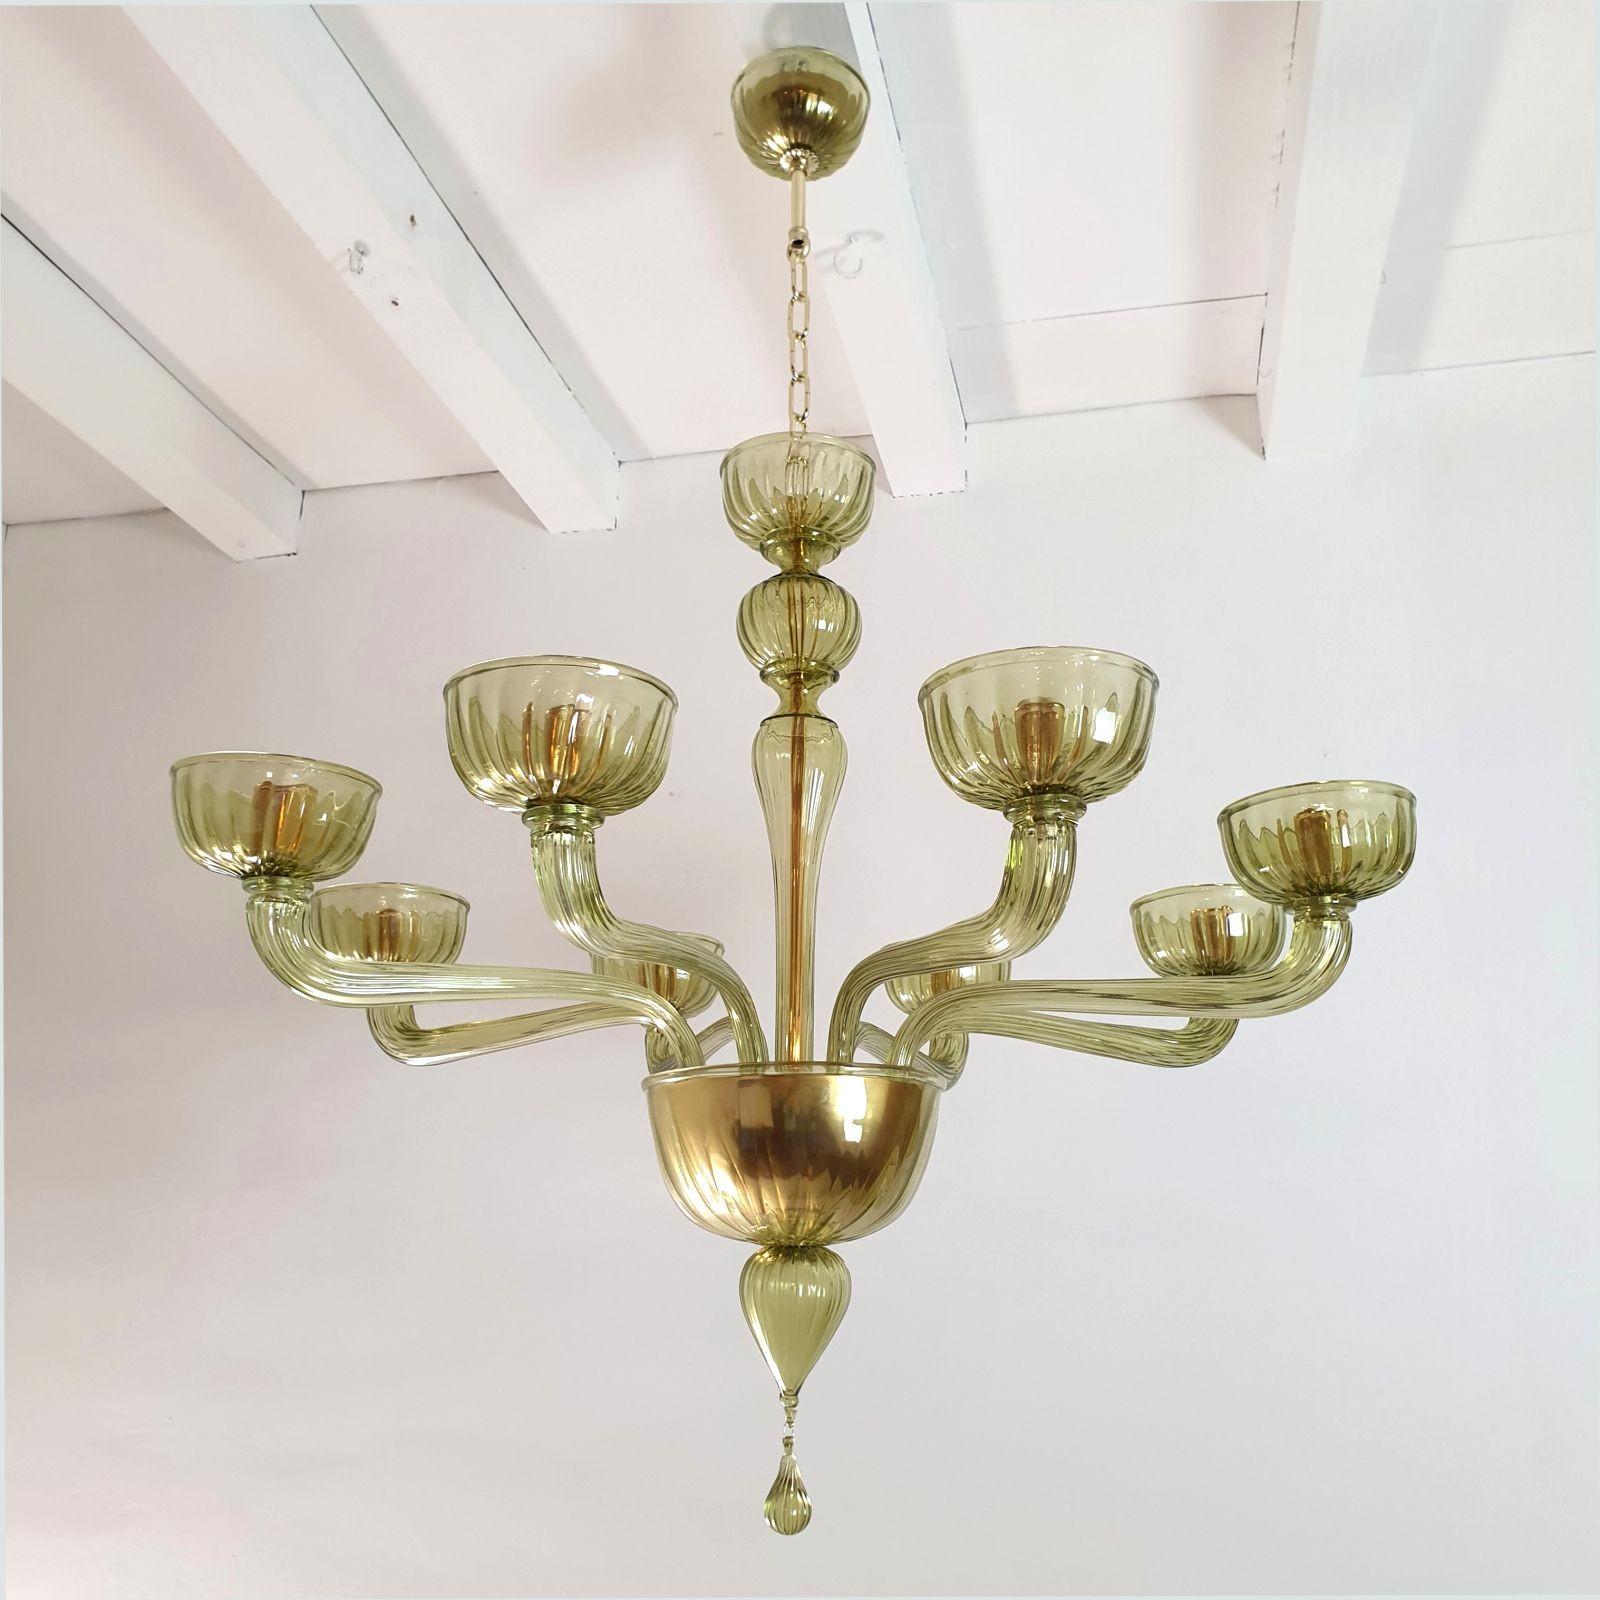 Mid-Century Modern Murano glass chandelier, Venini style, Italy 1970s.
The large chandelier is handmade in a light olive green Murano glass, with gold plated mounts.
The Neoclassical Murano chandelier has pure lines, in the Mid century Modern